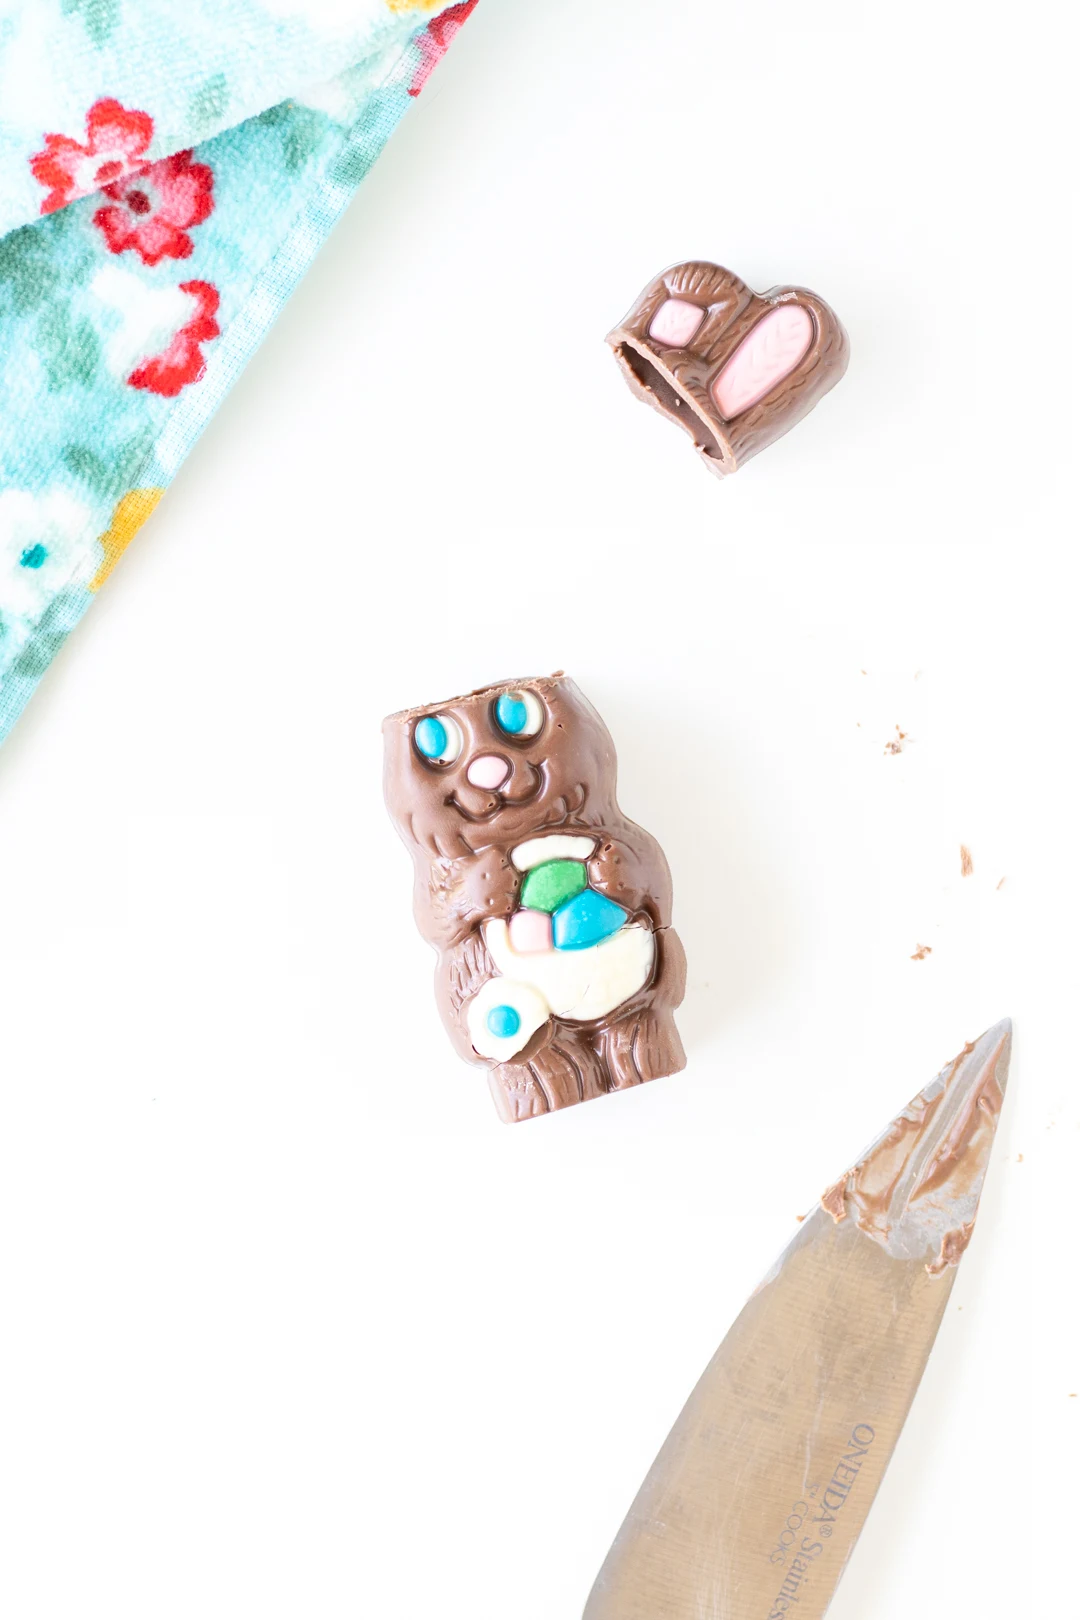 small hollow chocolate easter bunny with ears cut off. knife with melted chocolate on blade.